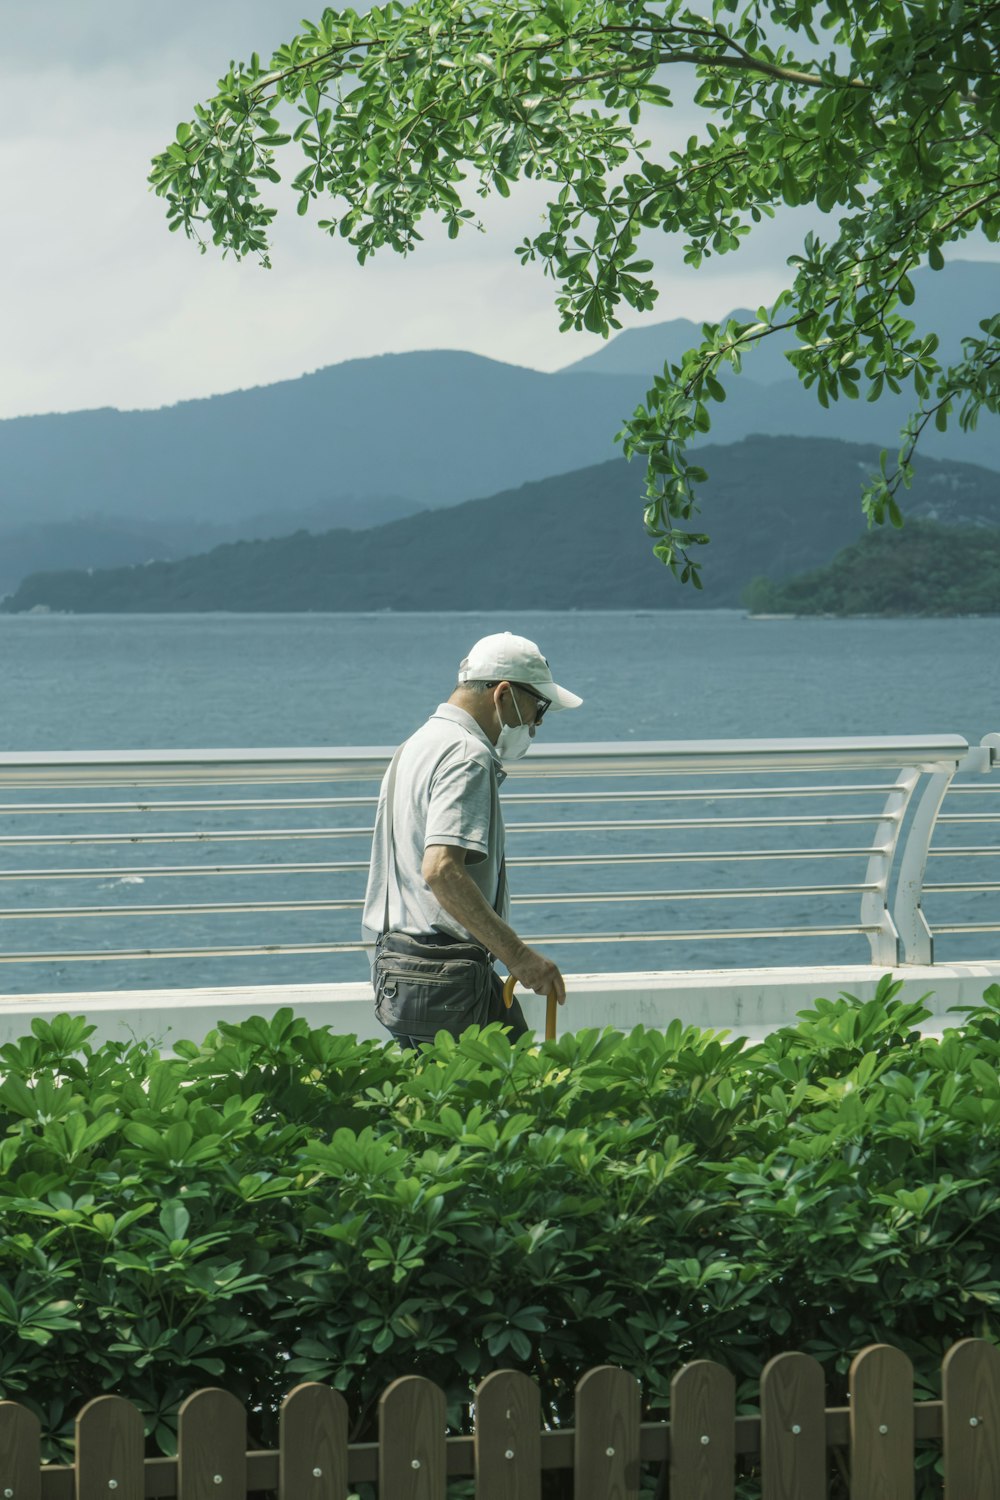 a man in a white hat is walking by the water